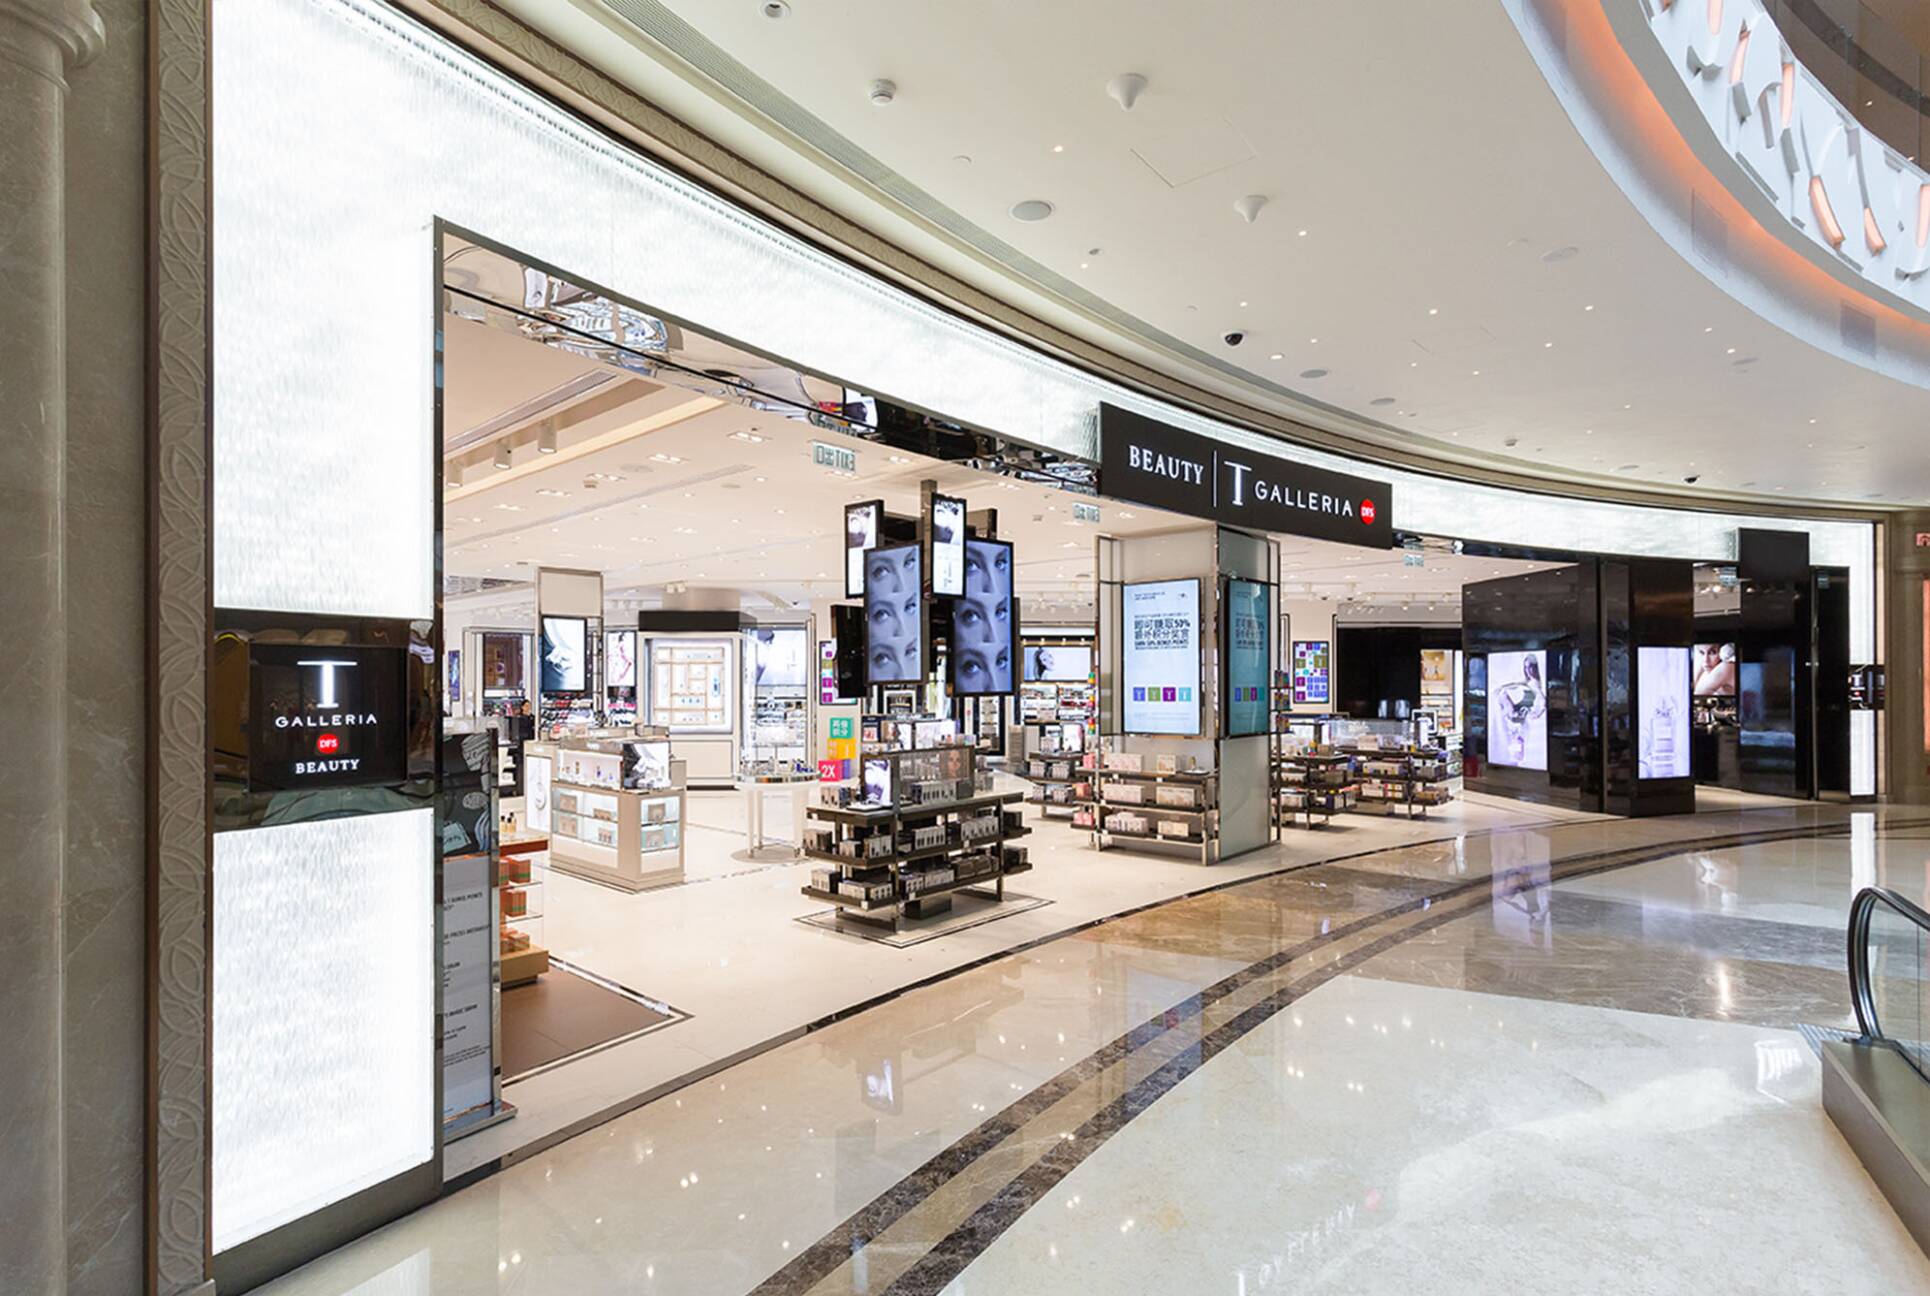 LVMH Selective Retailing +26% in 2022; DFS hampered by China restrictions